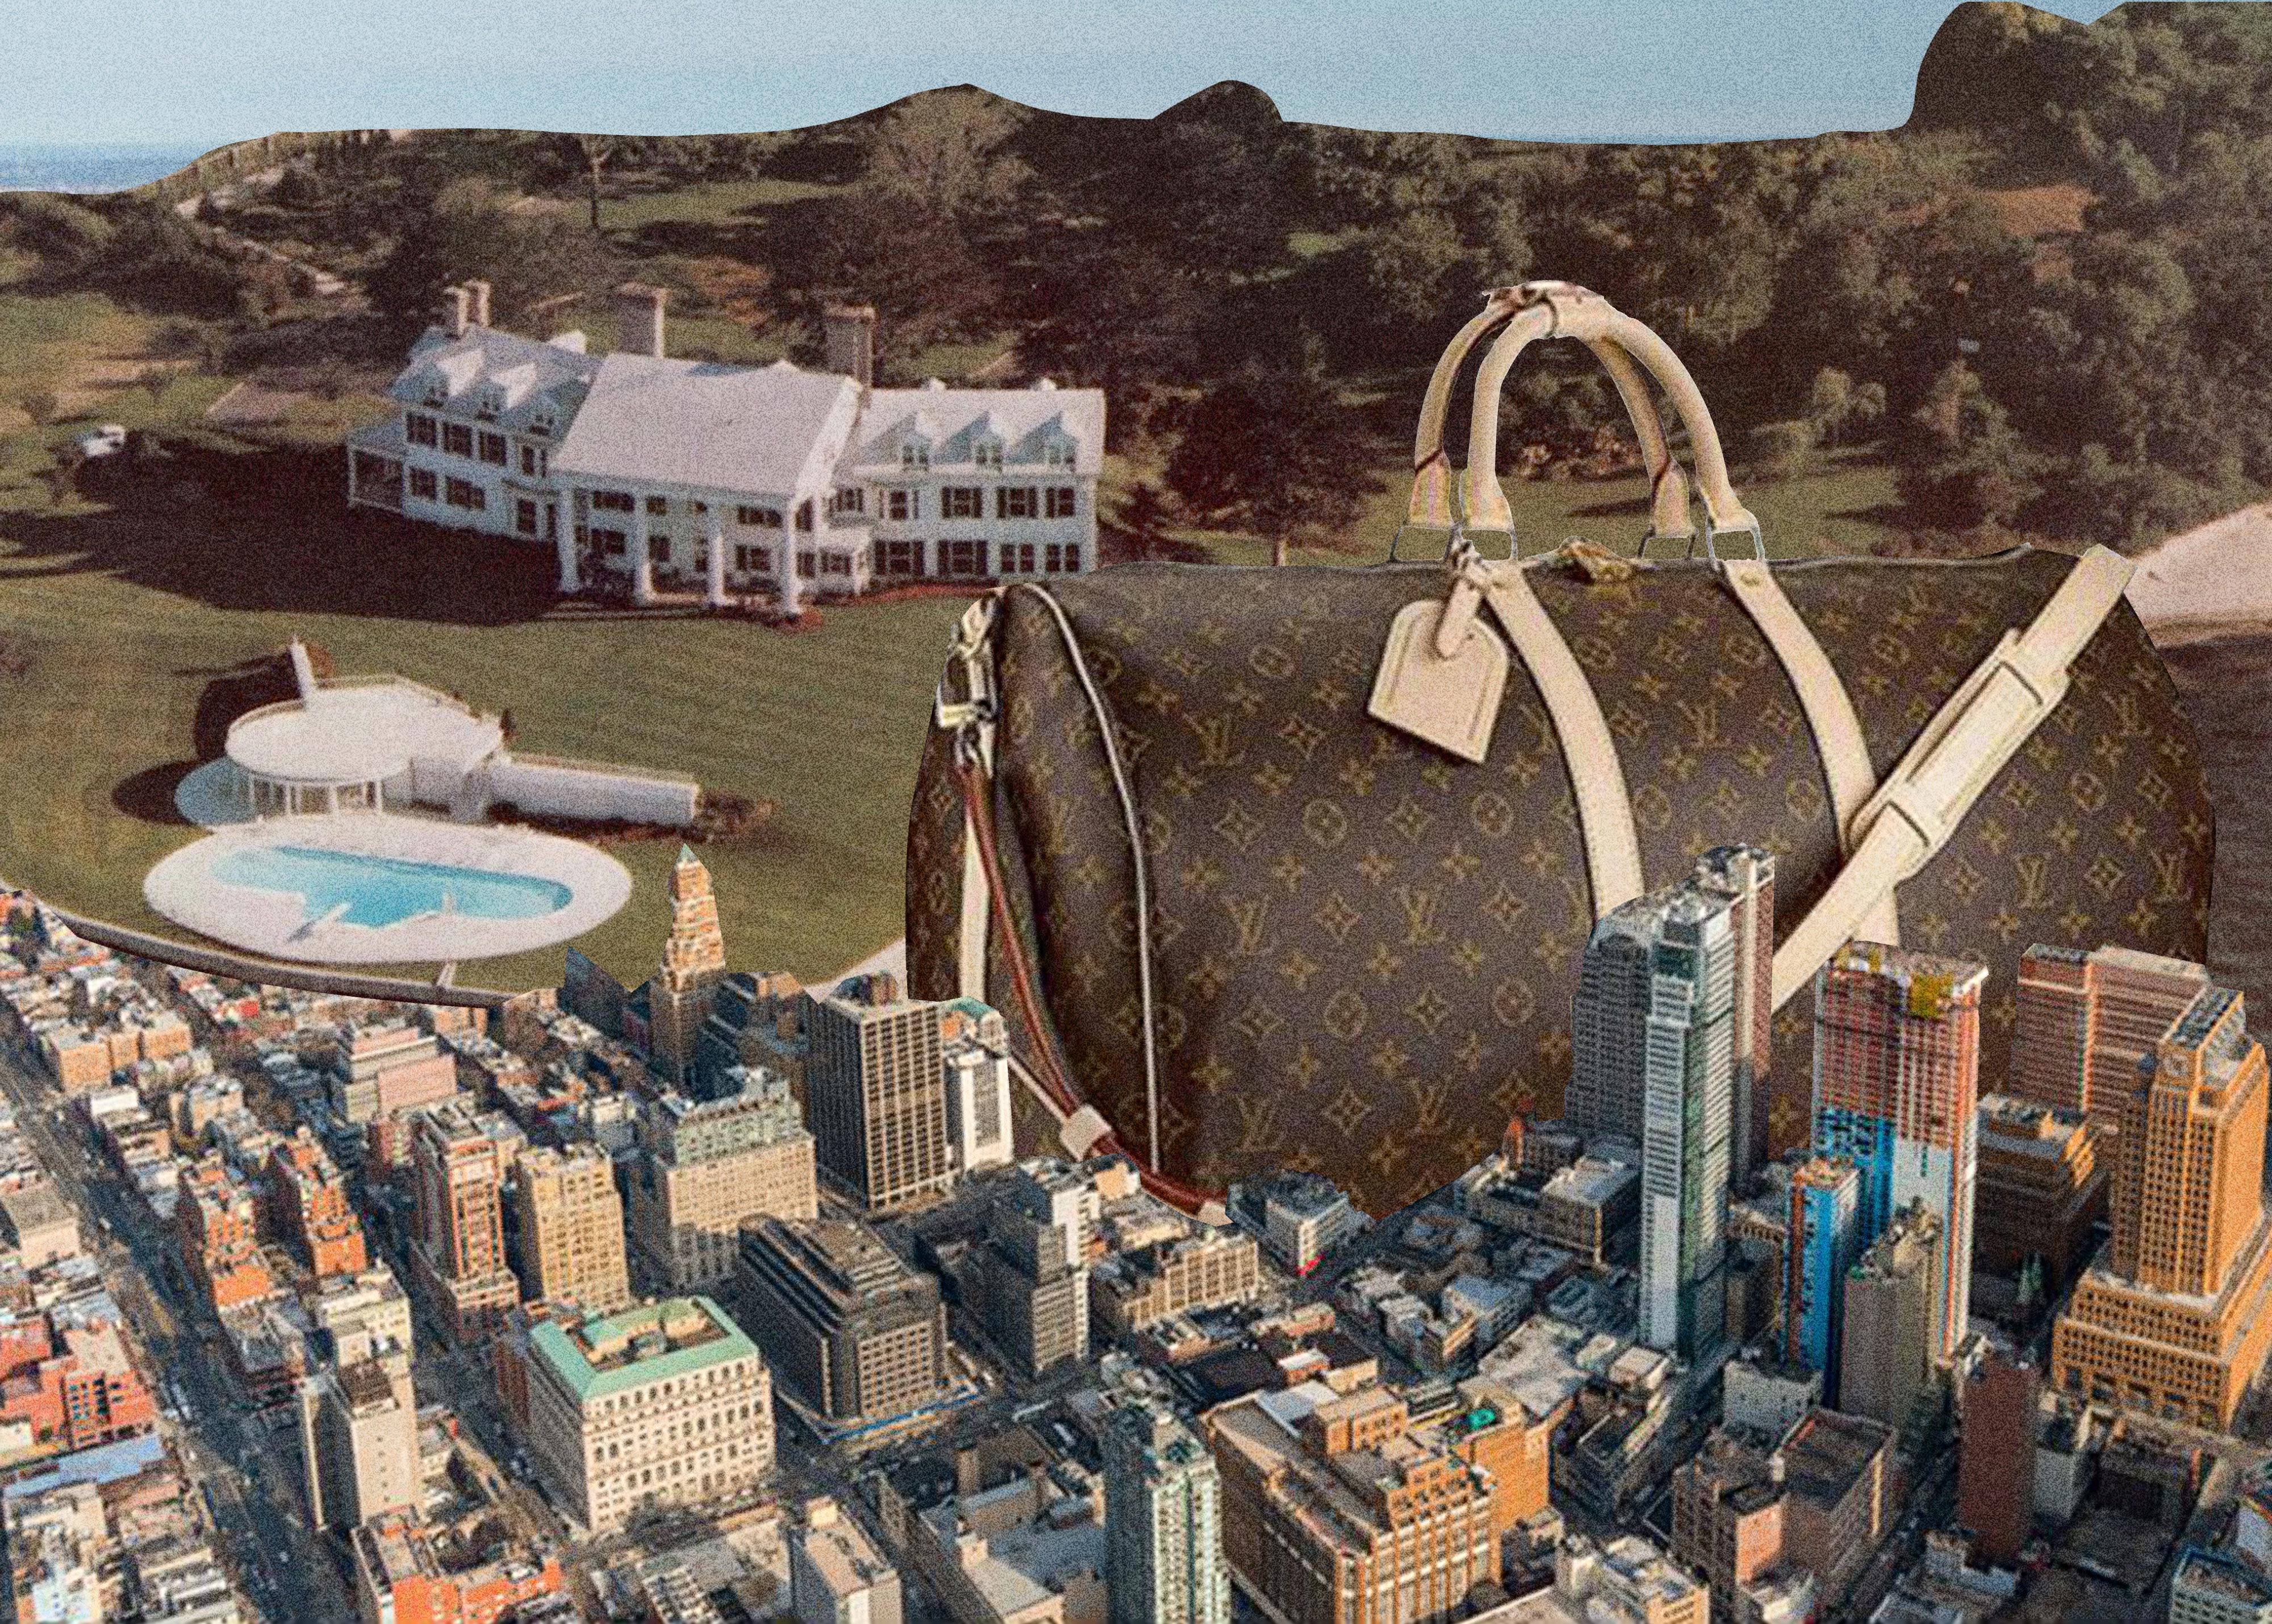 The Most Expensive Louis Vuitton Made From Garbage: LV Urban